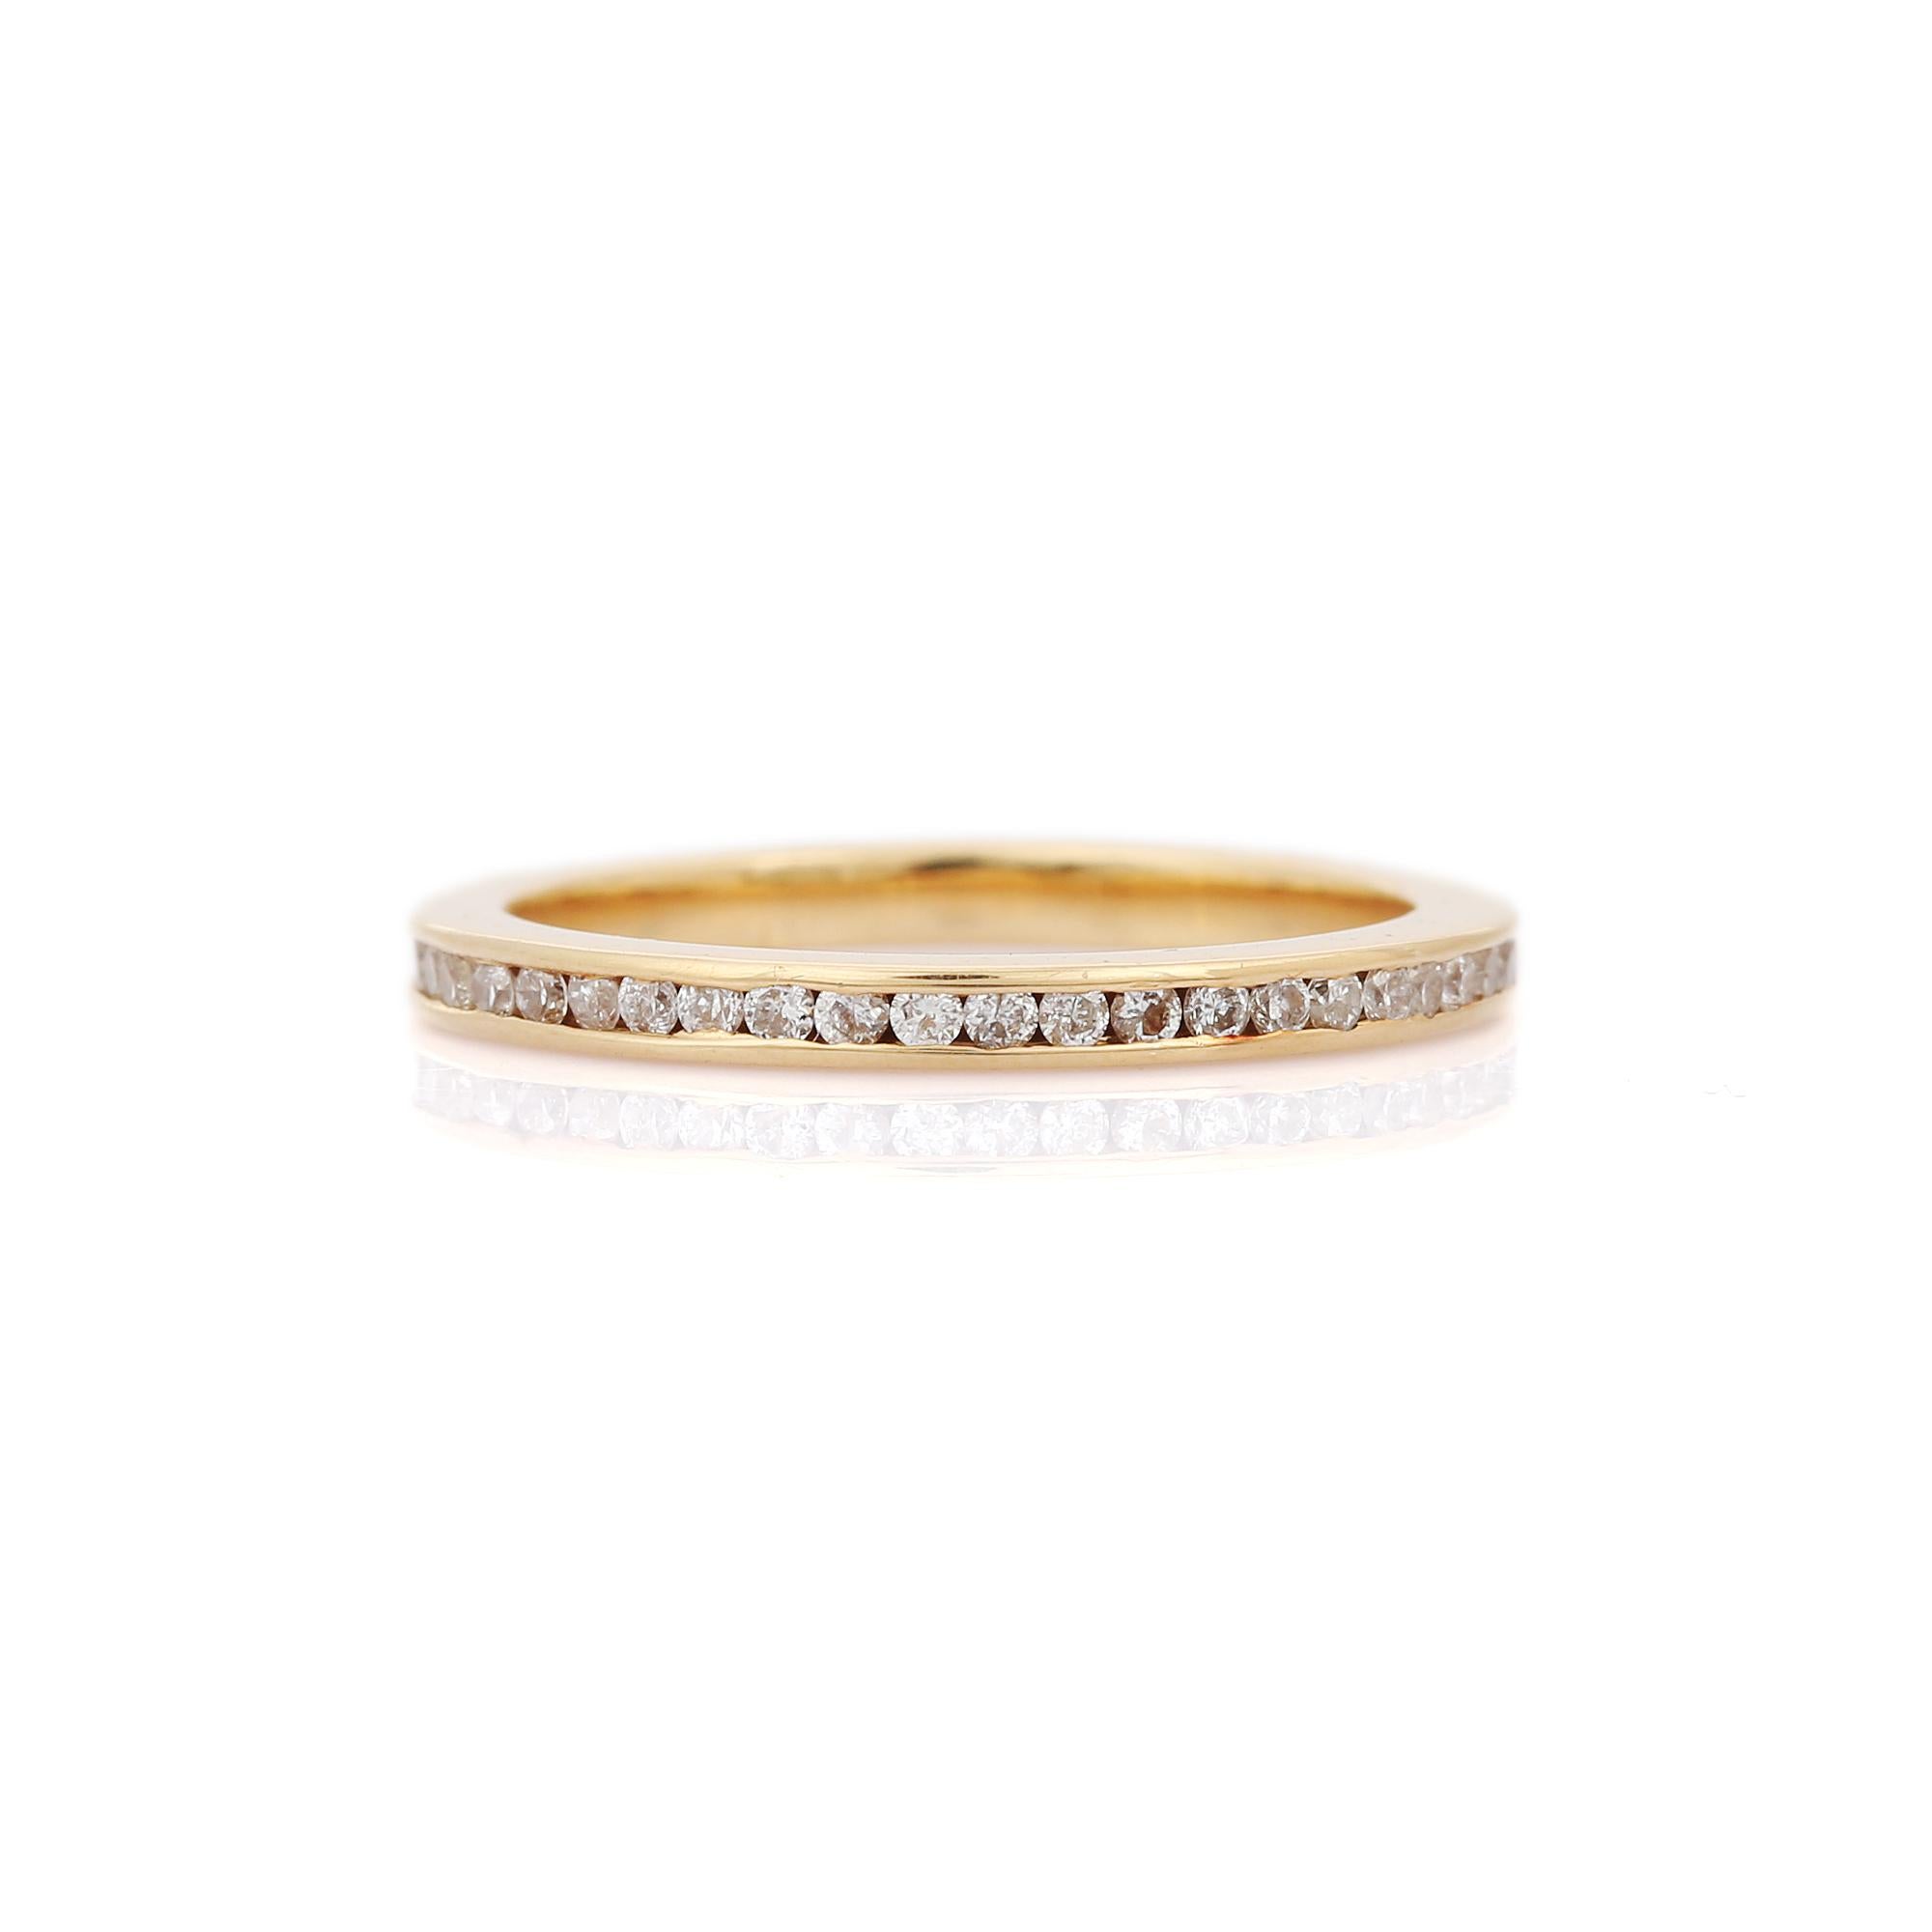 For Sale:  18K Yellow Gold Stackable Everyday Diamond Eternity Band Ring, Christmas Gifts 9